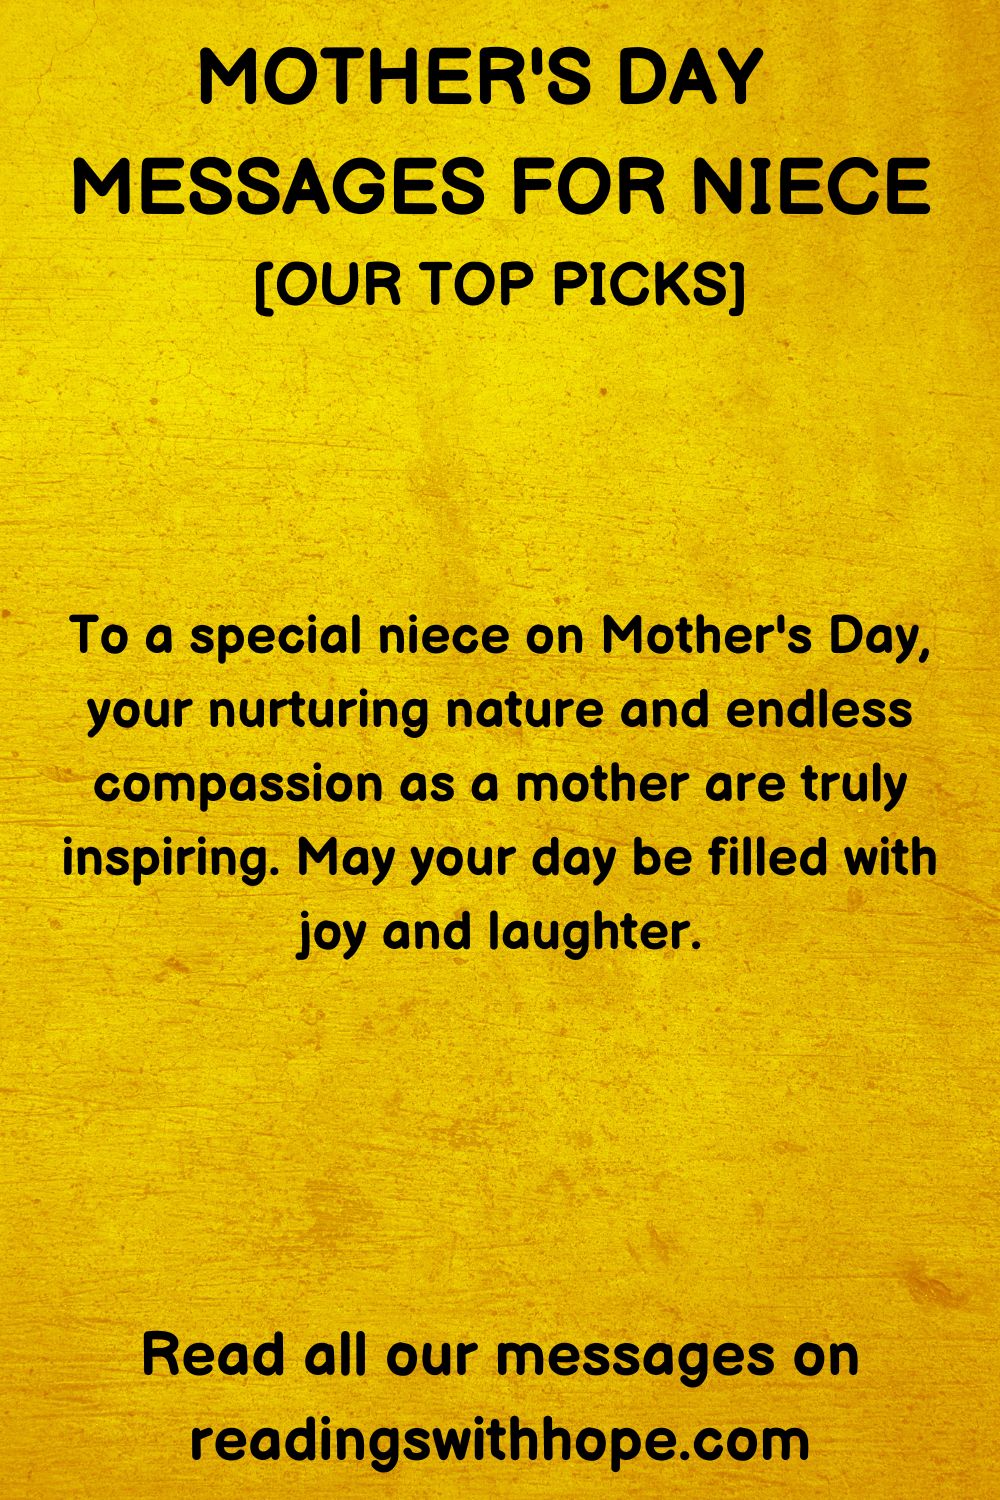 50 Mother's Day Messages for Niece